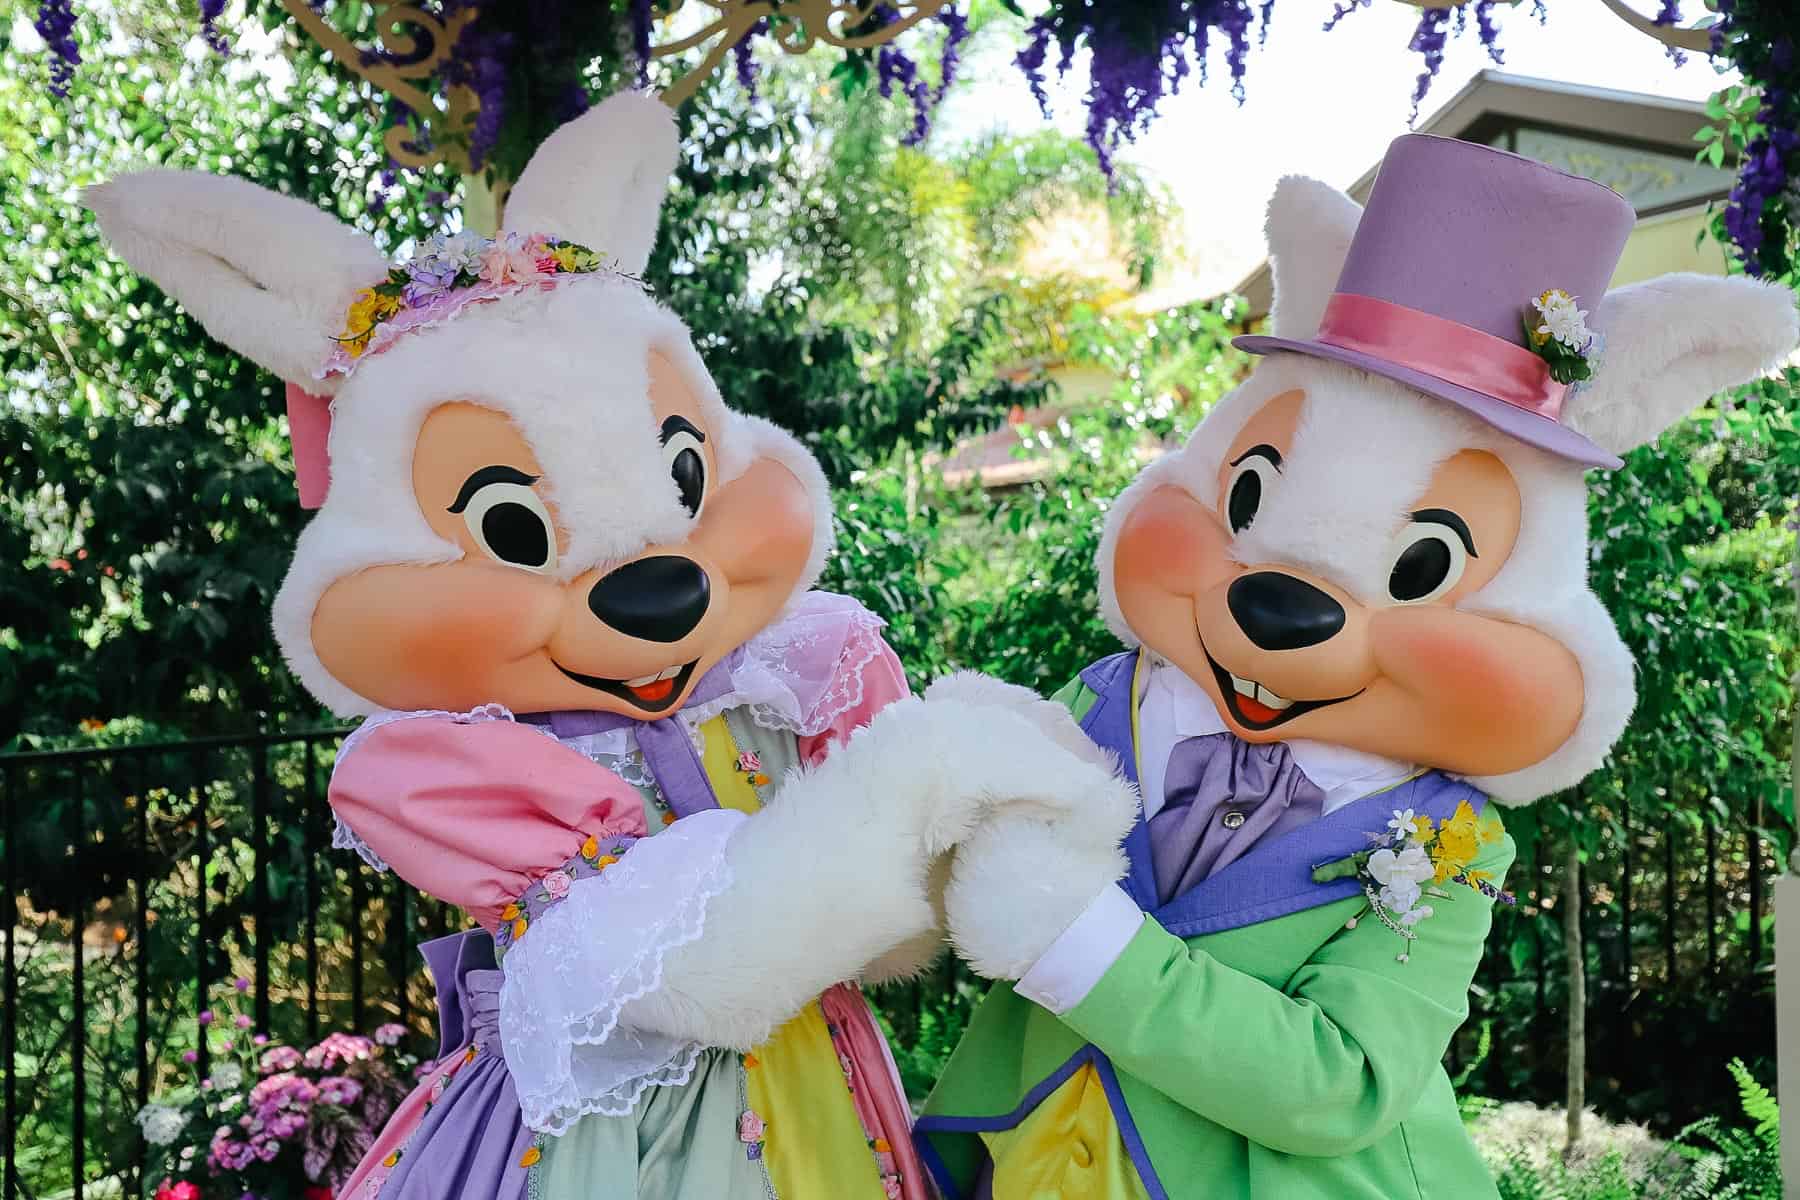 Mr. and Mrs. Easter Bunny at Magic Kingdom